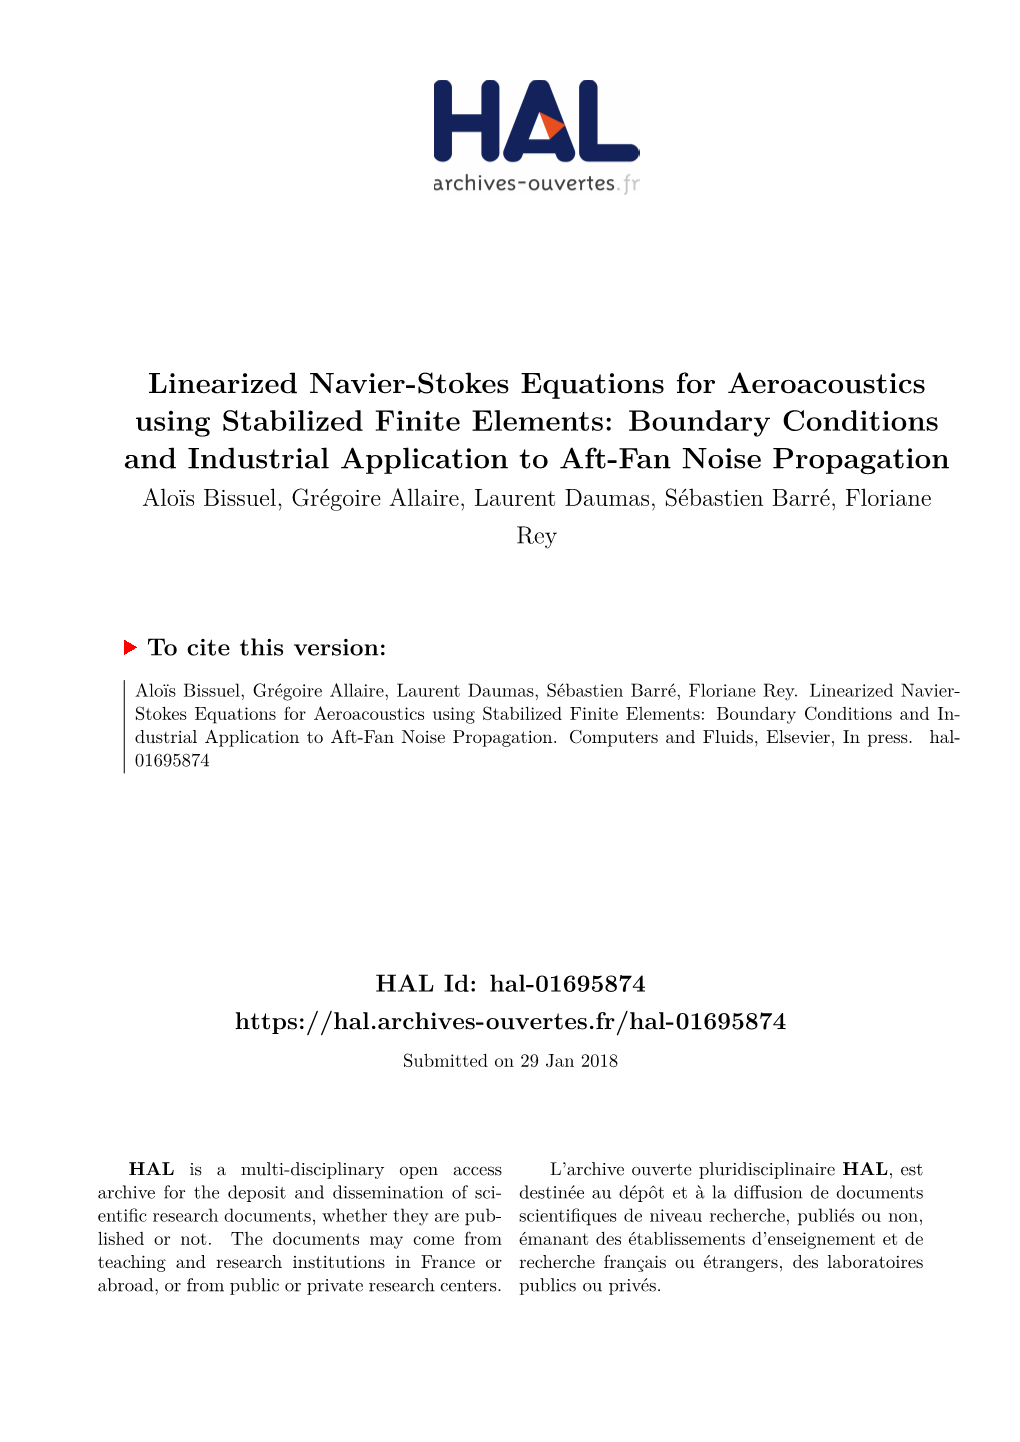 Linearized Navier-Stokes Equations for Aeroacoustics Using Stabilized